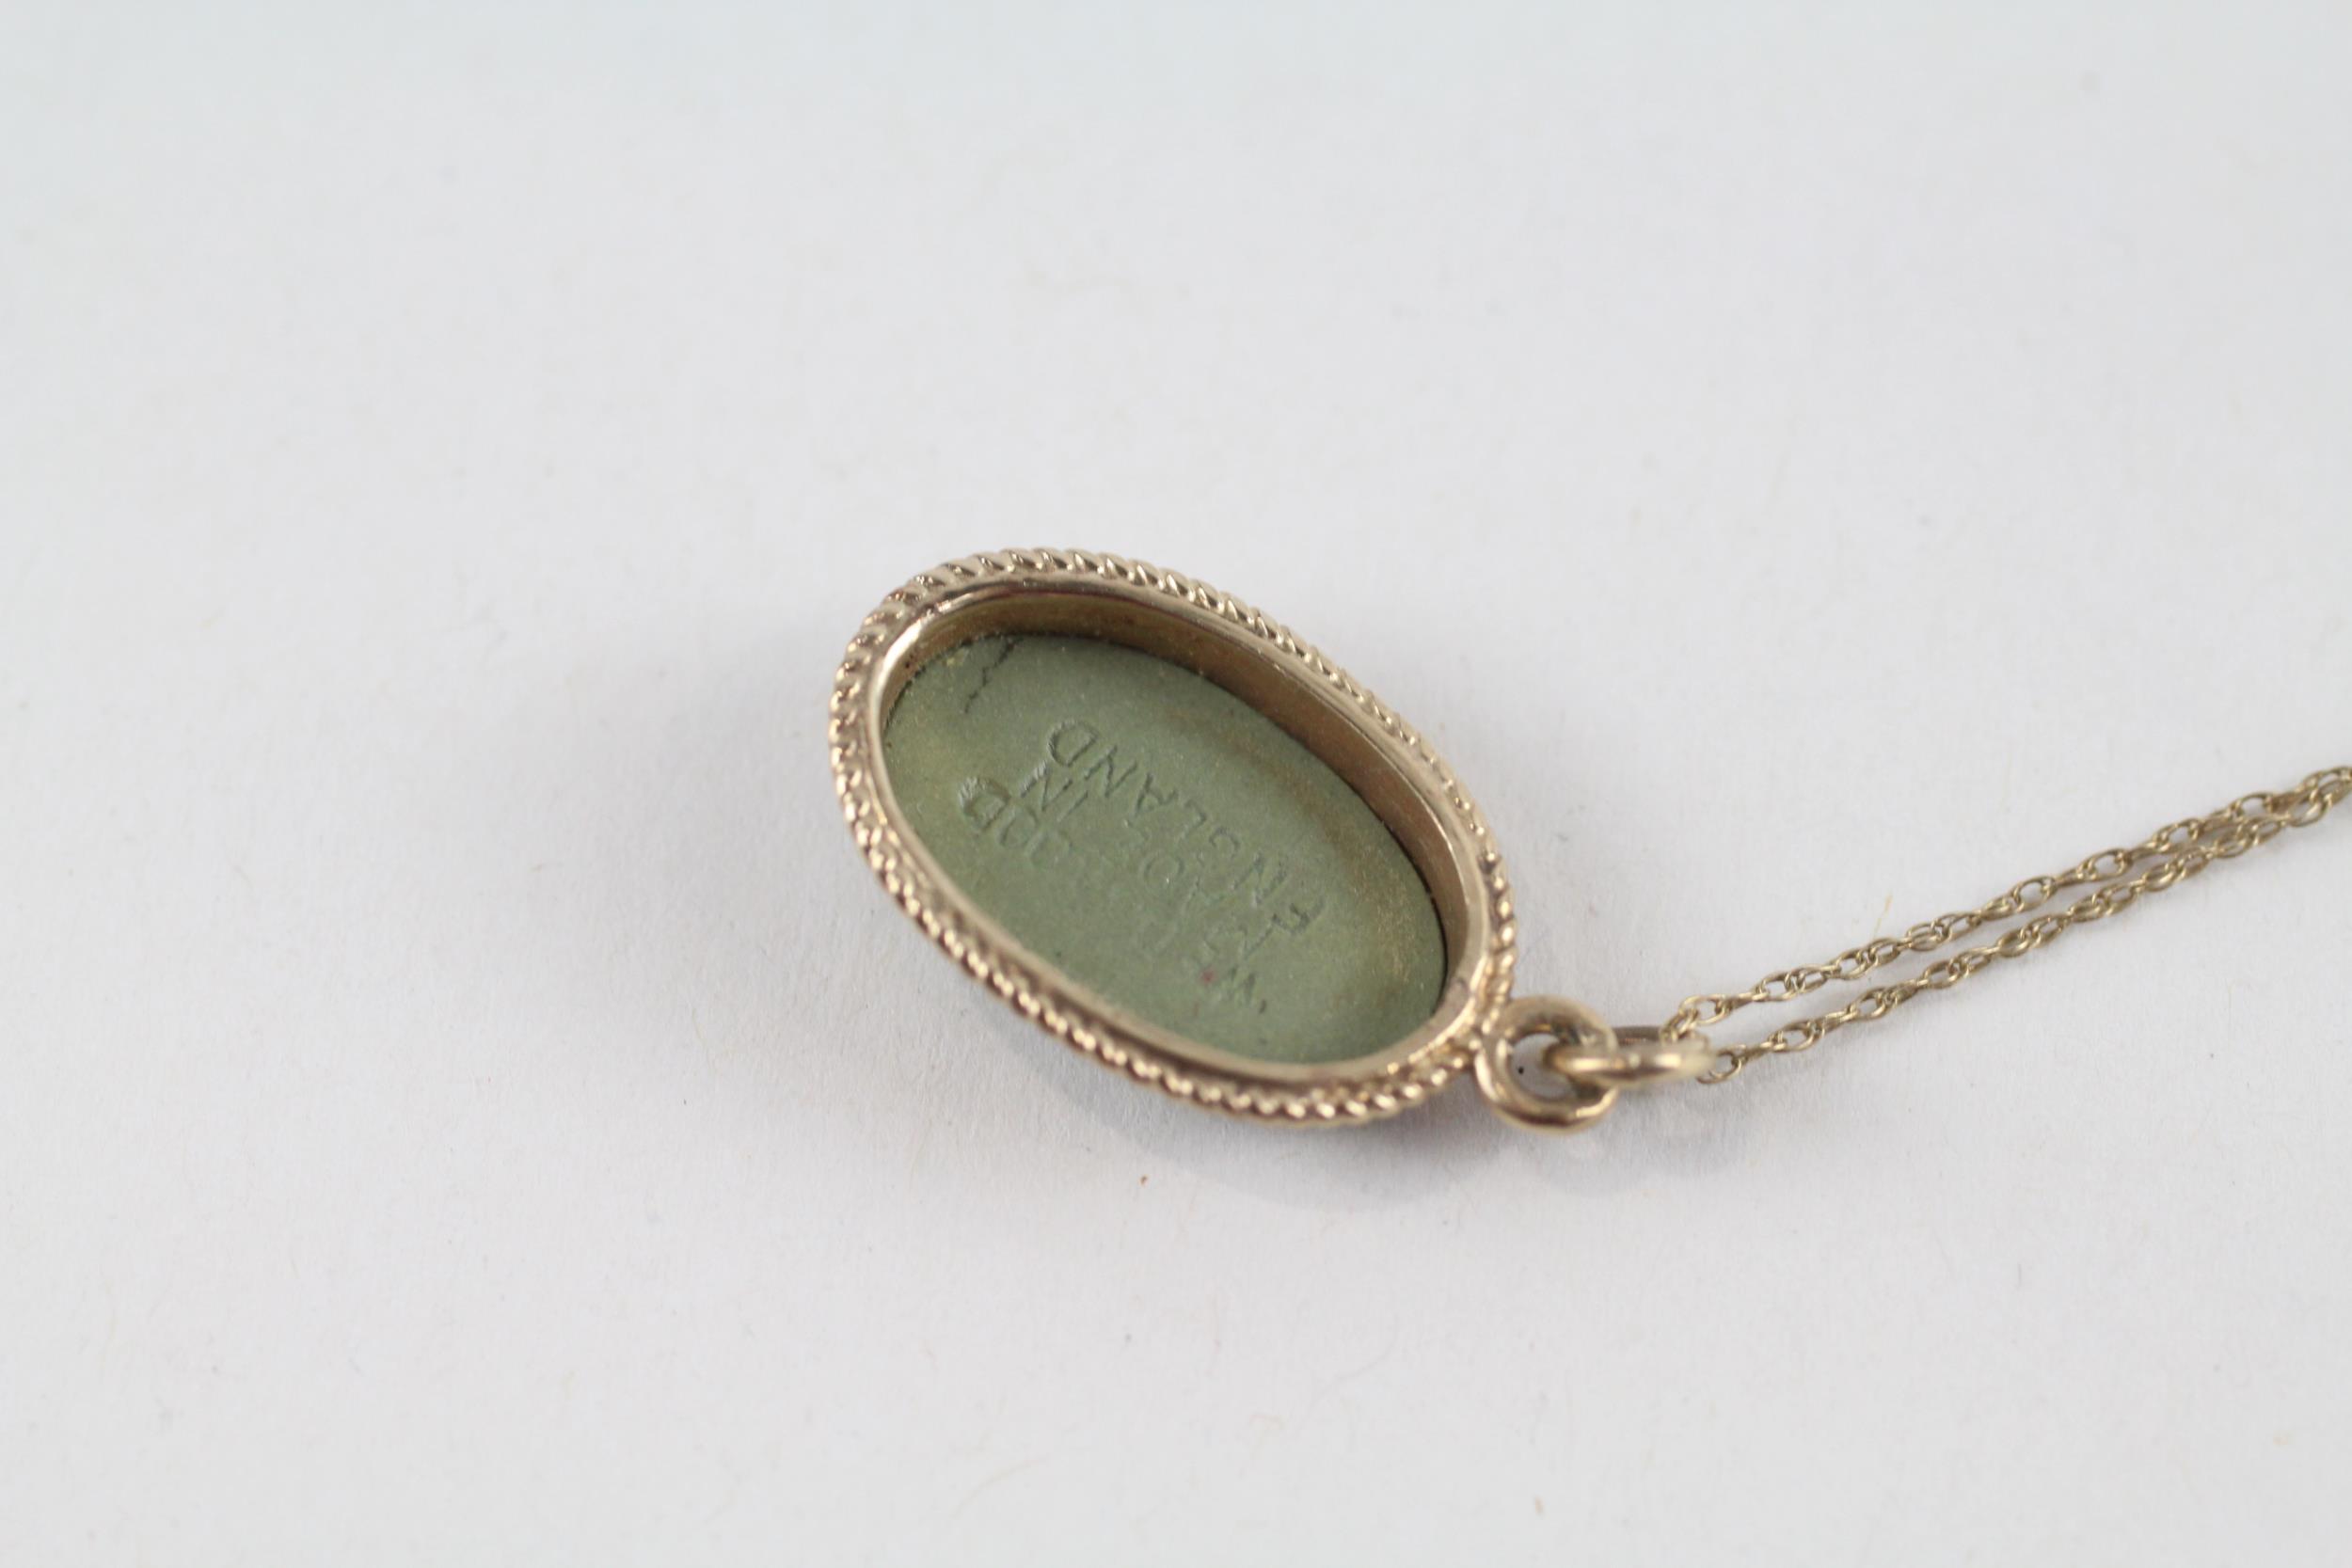 9ct gold Wedgewood pendant & chain (1.9g) - Image 4 of 4